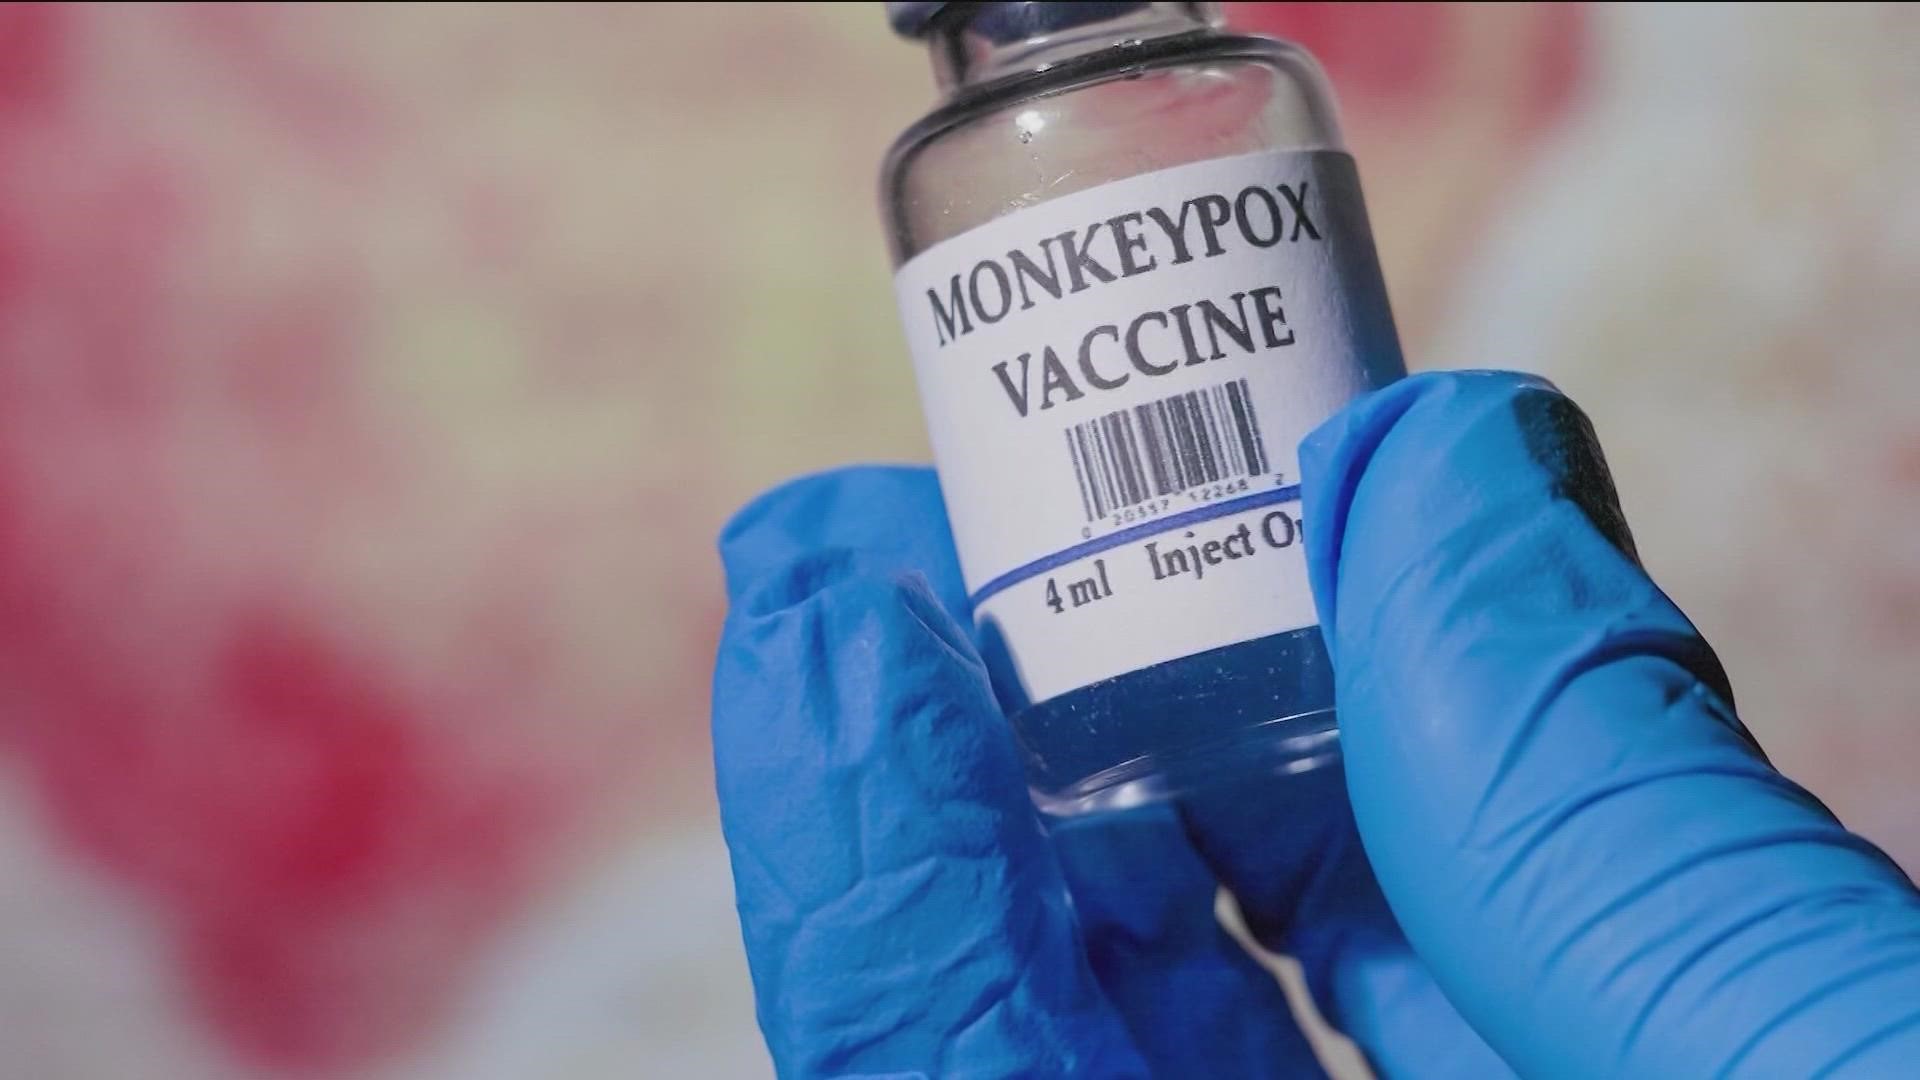 Austin Public Health has been working to reduce the spread of monkeypox in the community.